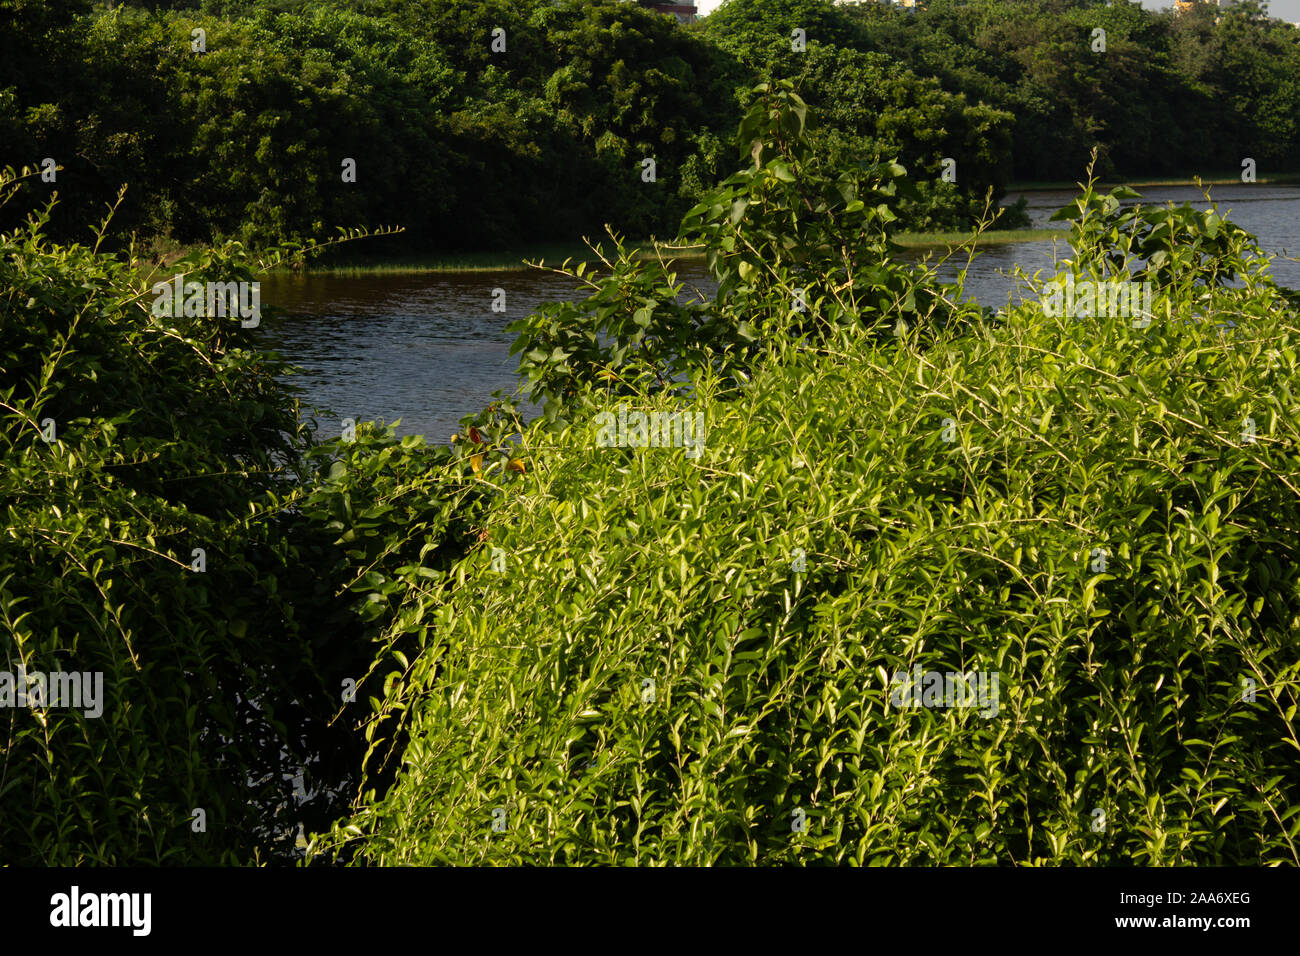 Greenery of lush vegetation and freshwater in a park Stock Photo